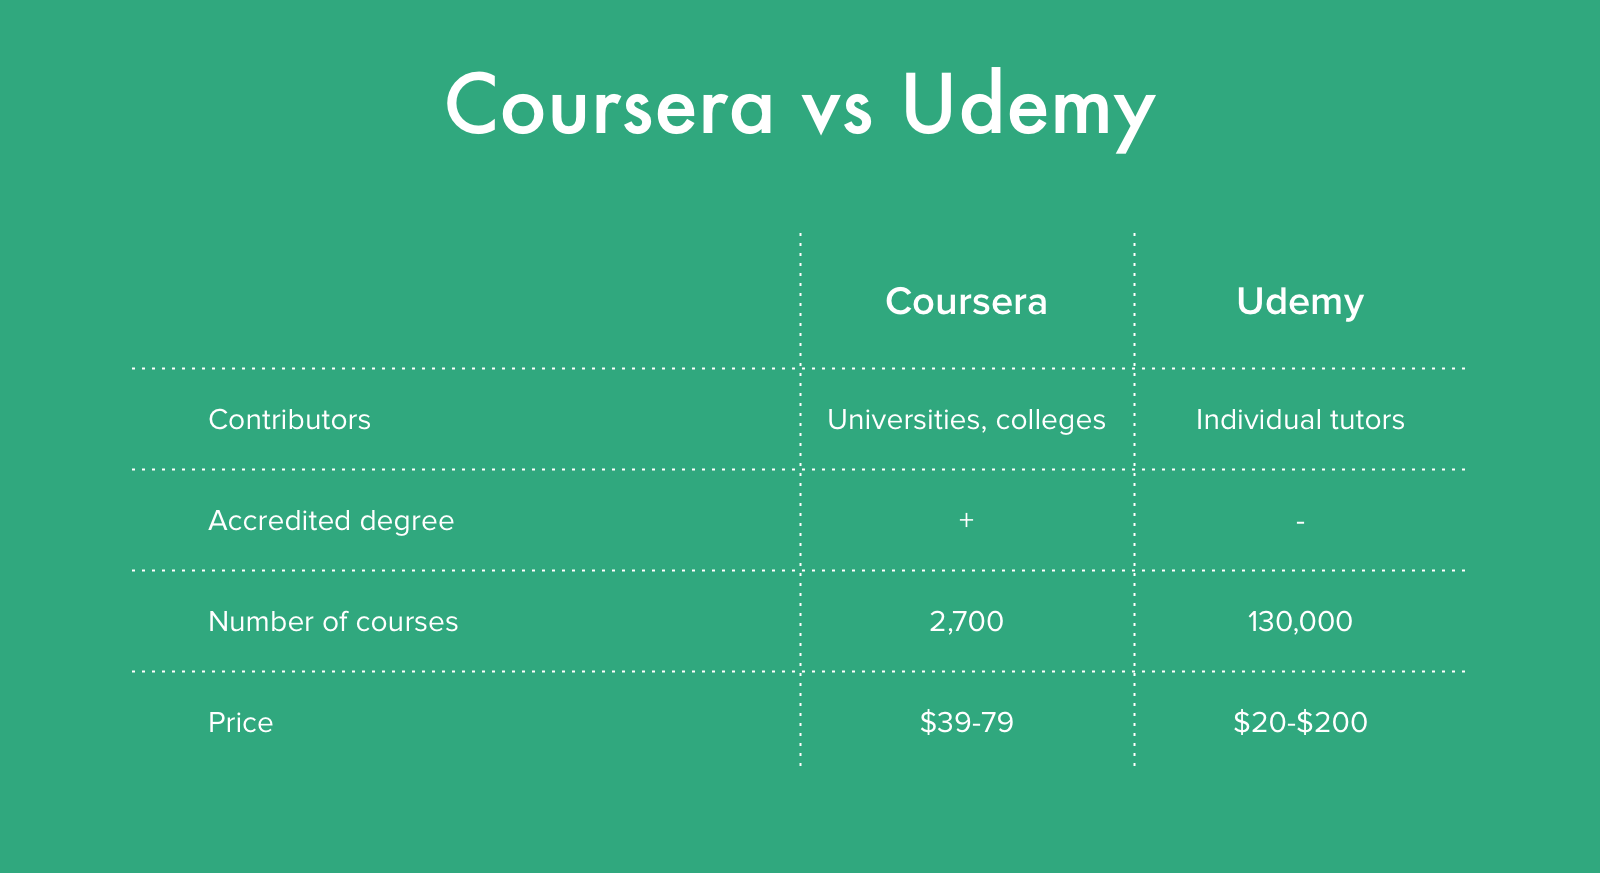 Want to Make An eLearning Platform Like Coursera or Udemy? Here's How to Start